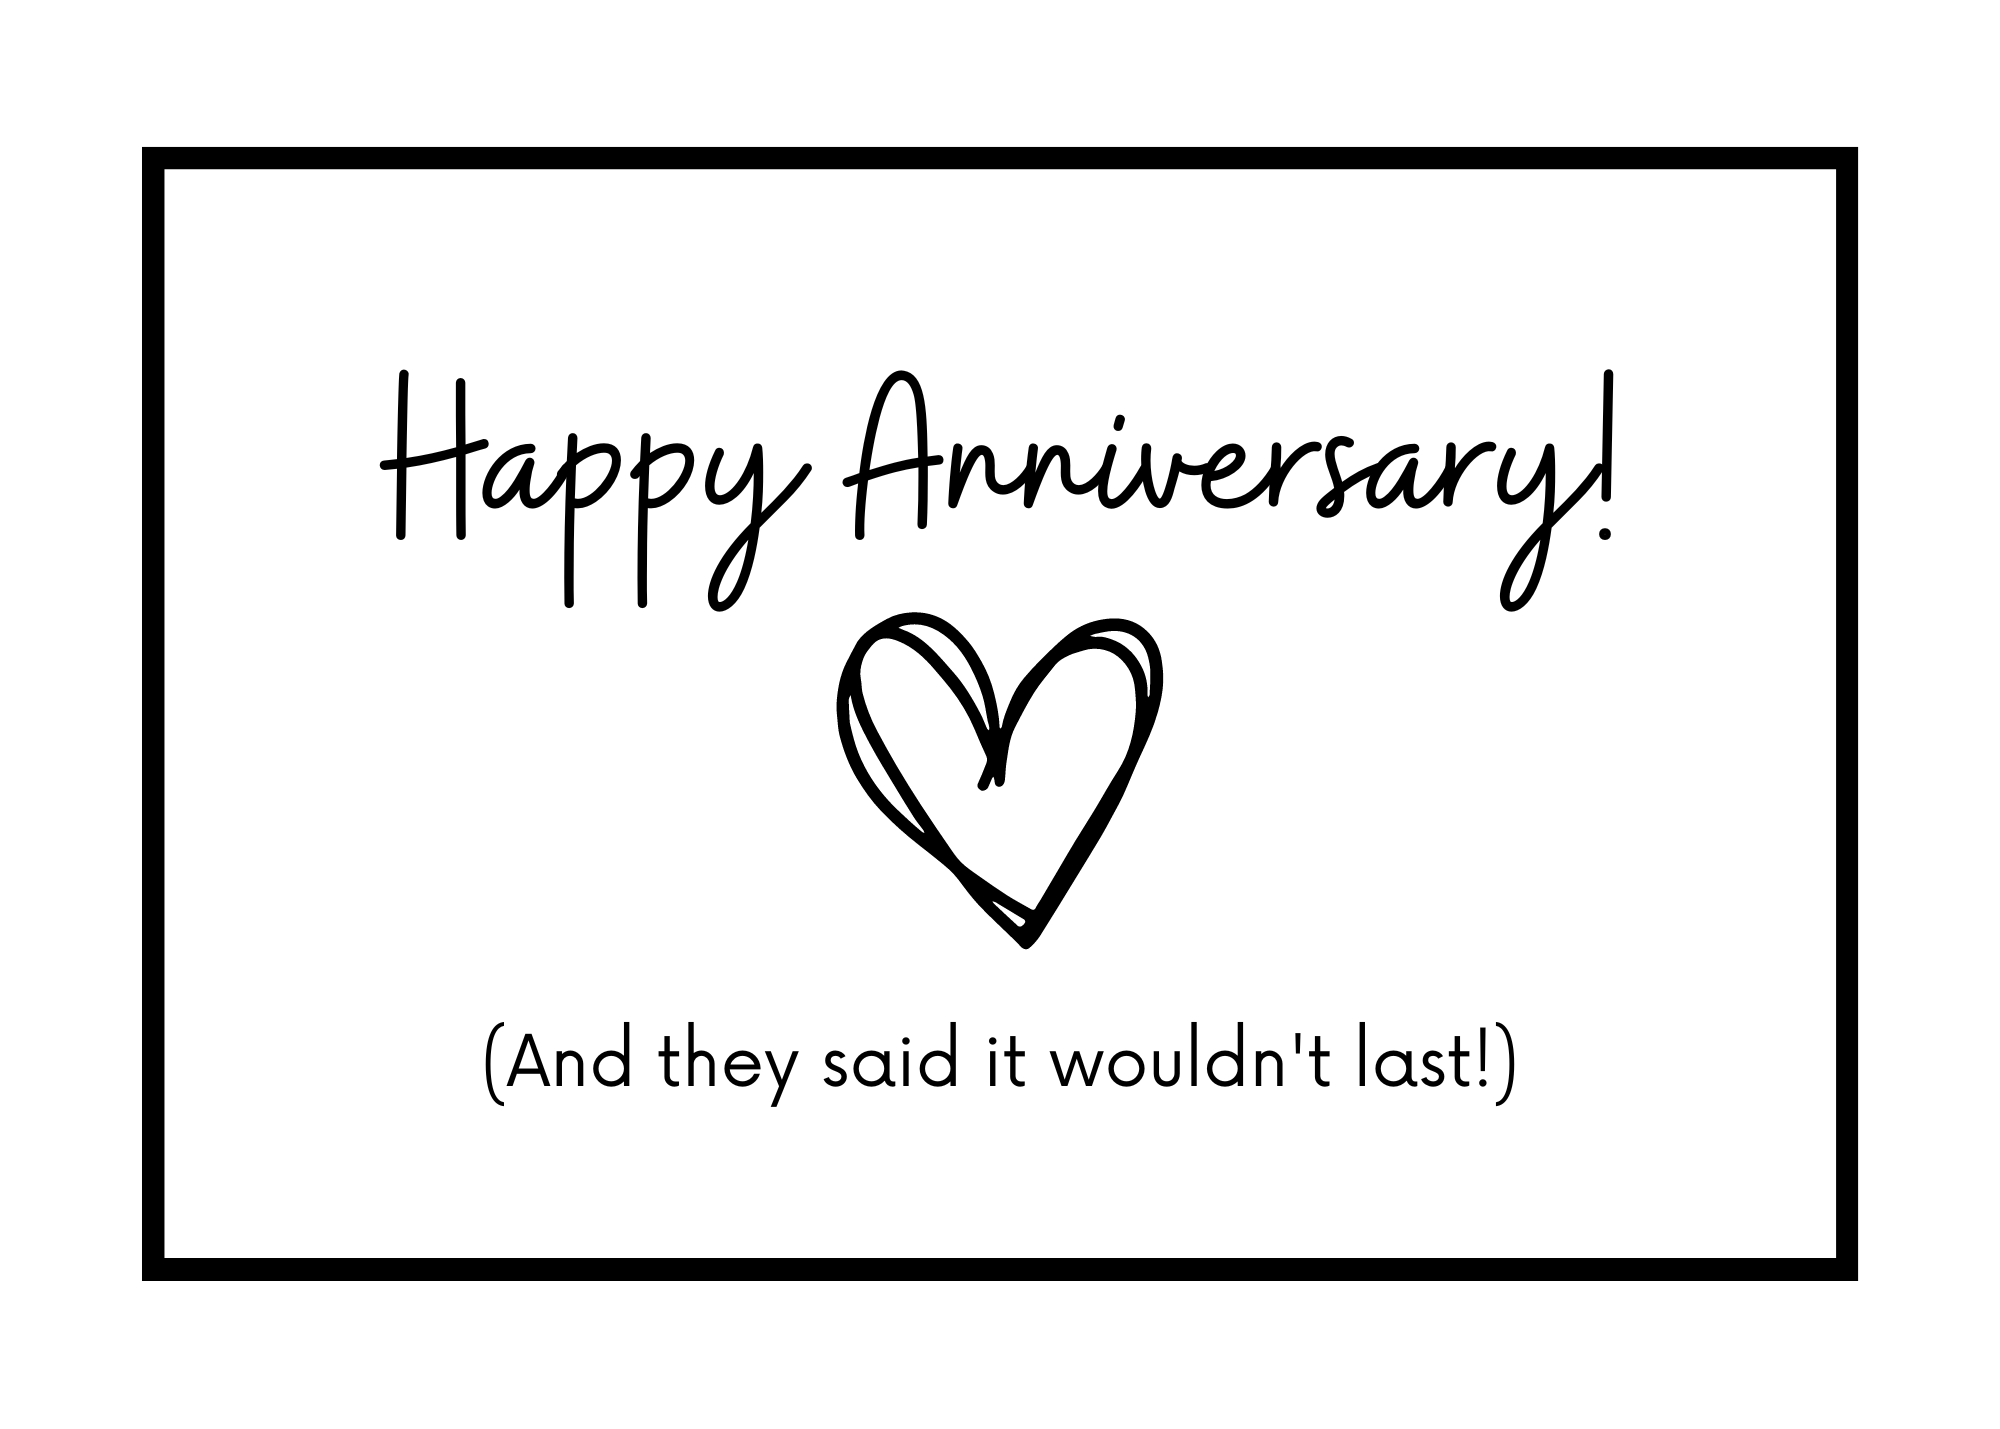 White seed paper greeting card saying "Happy Anniversary! (And they said it wouldn't last!) with heart.